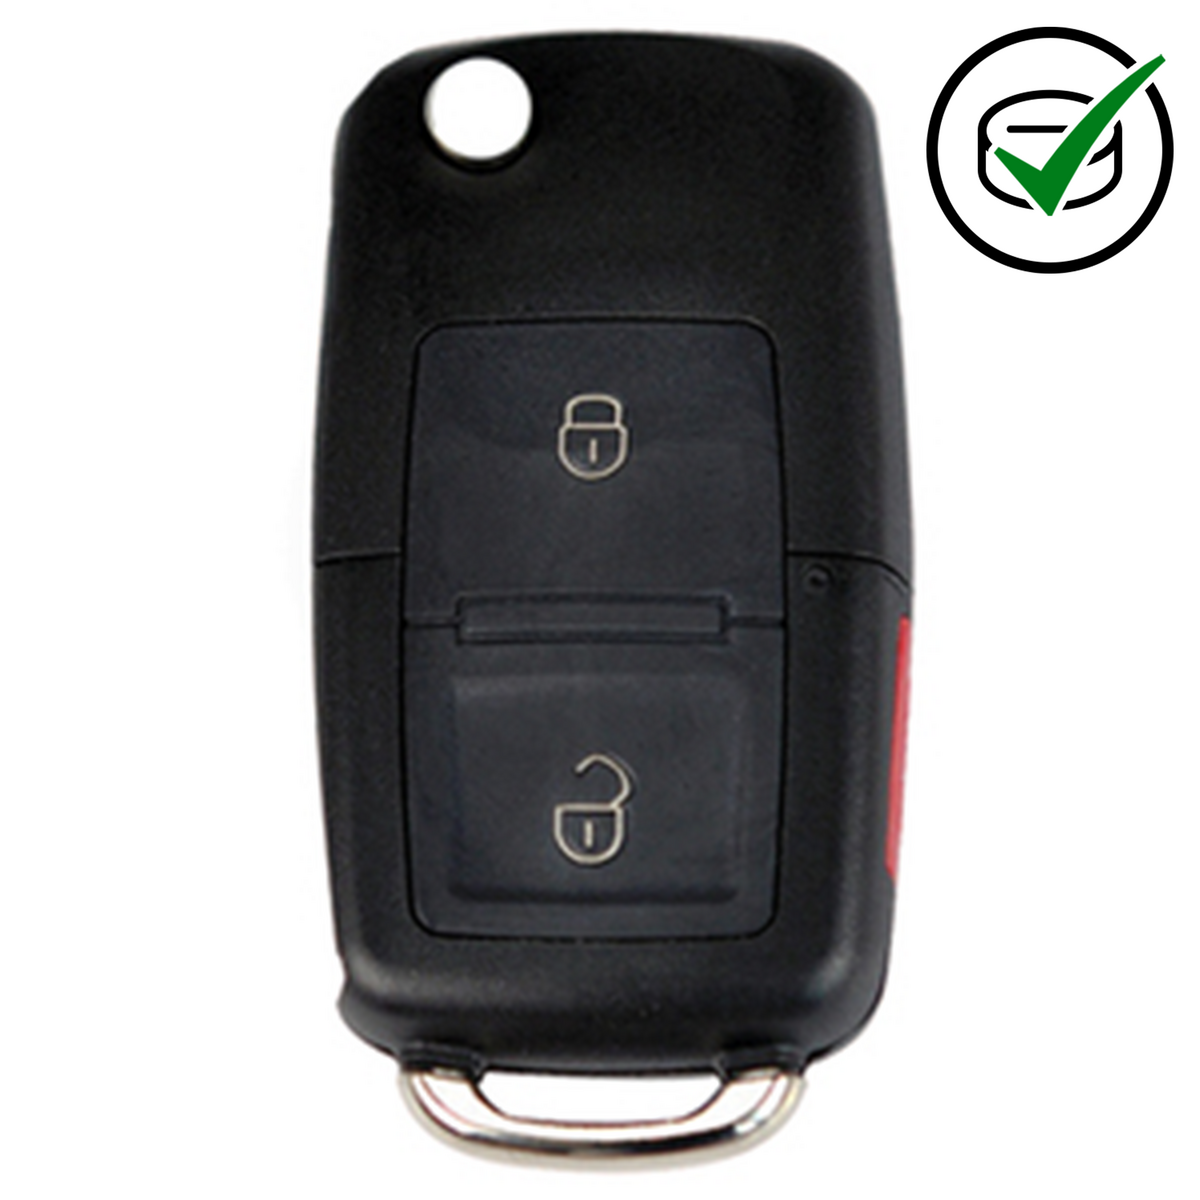 KD 900 key remote 2 button with panic VW Style